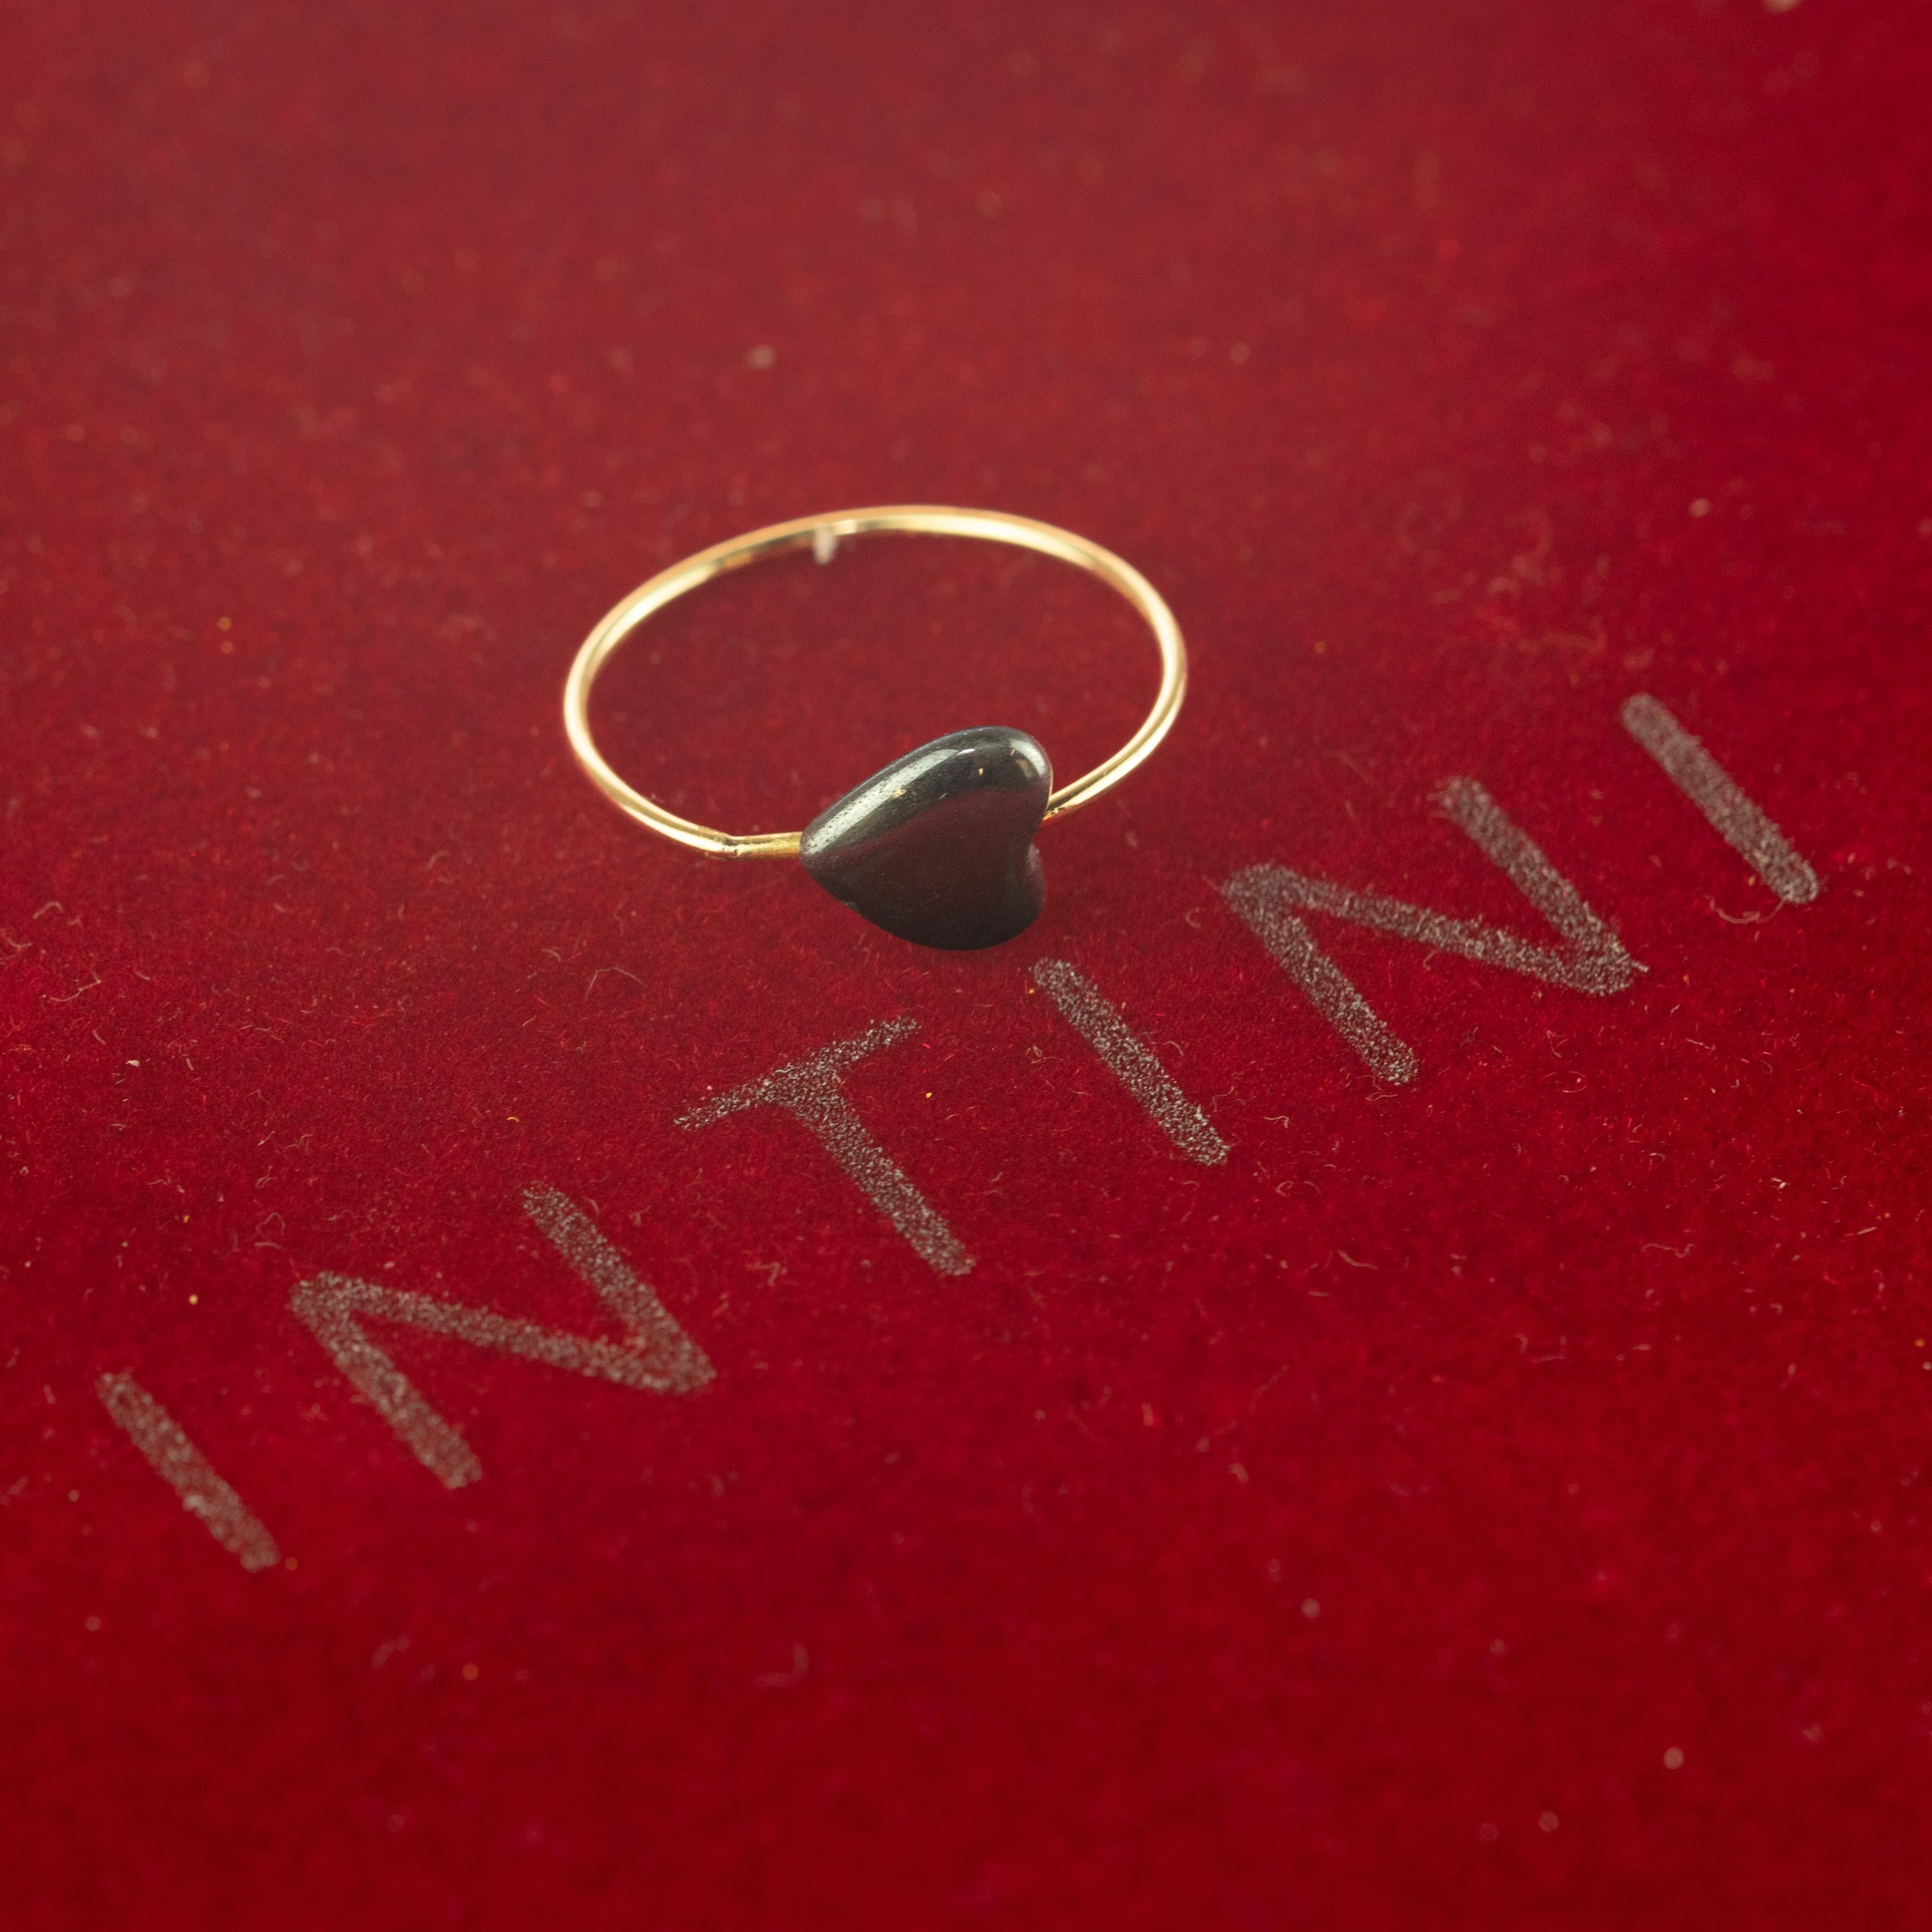 Signature INTINI Jewels Planet heart hematite band ring. Contemporary rings design in 18 karat yellow gold with a precious heart shaped bead hematite. Design and color mixed in one jewel. Delight yourself with a strong, minimalist design, just for a